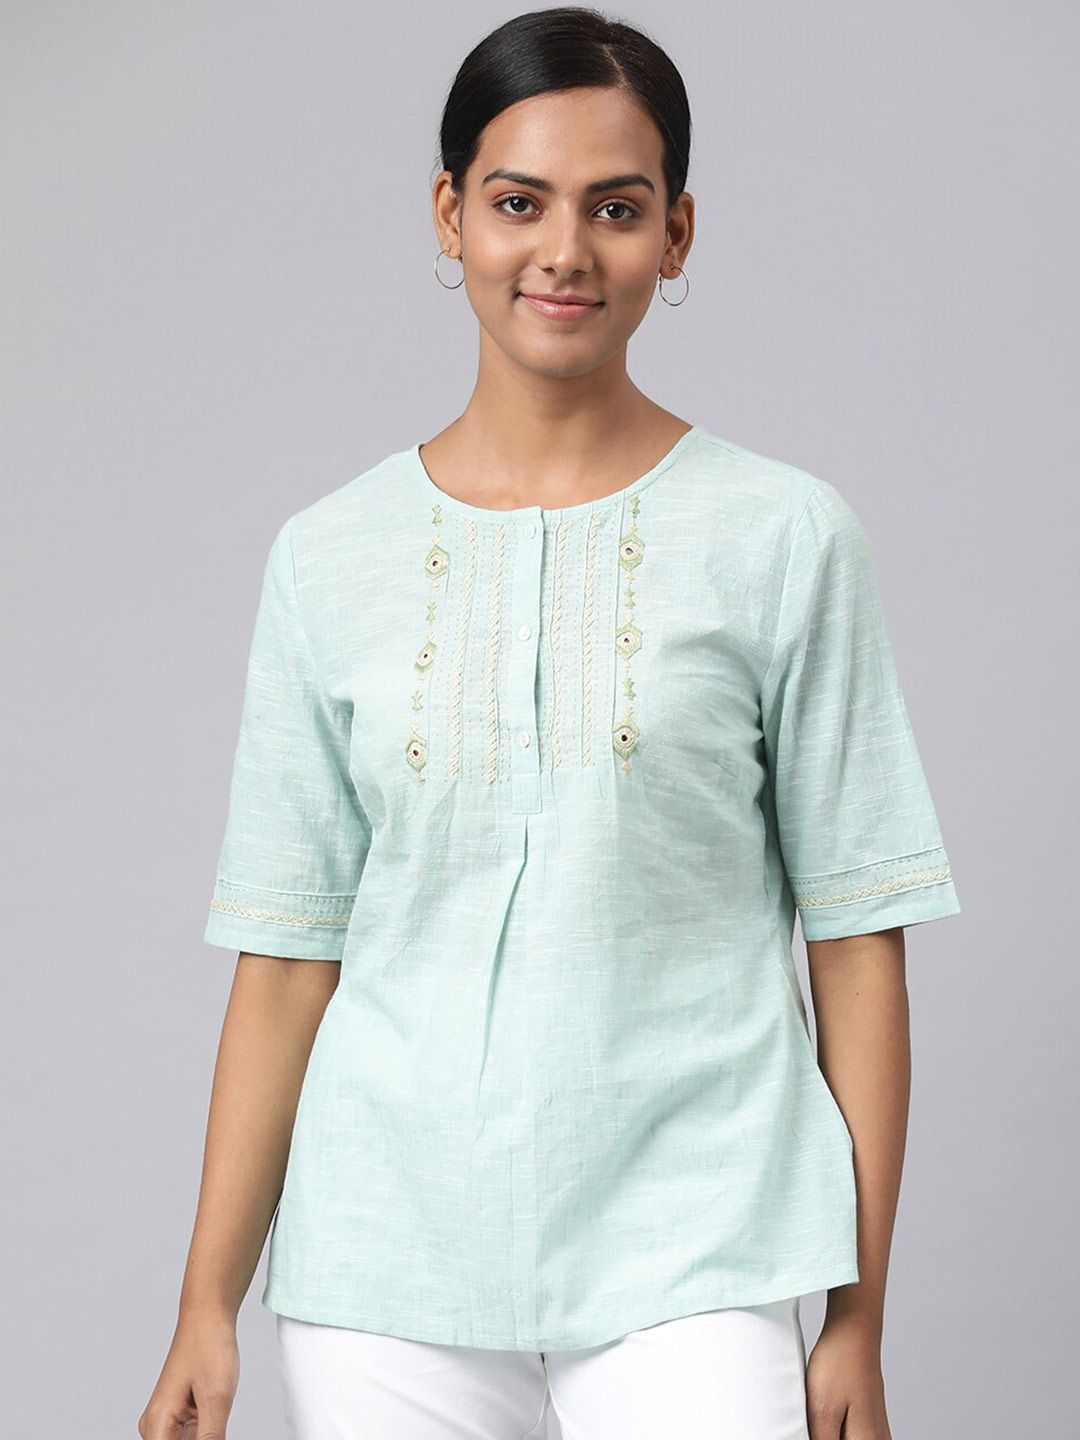 Fabindia Women Green Embroidered Top Price in India